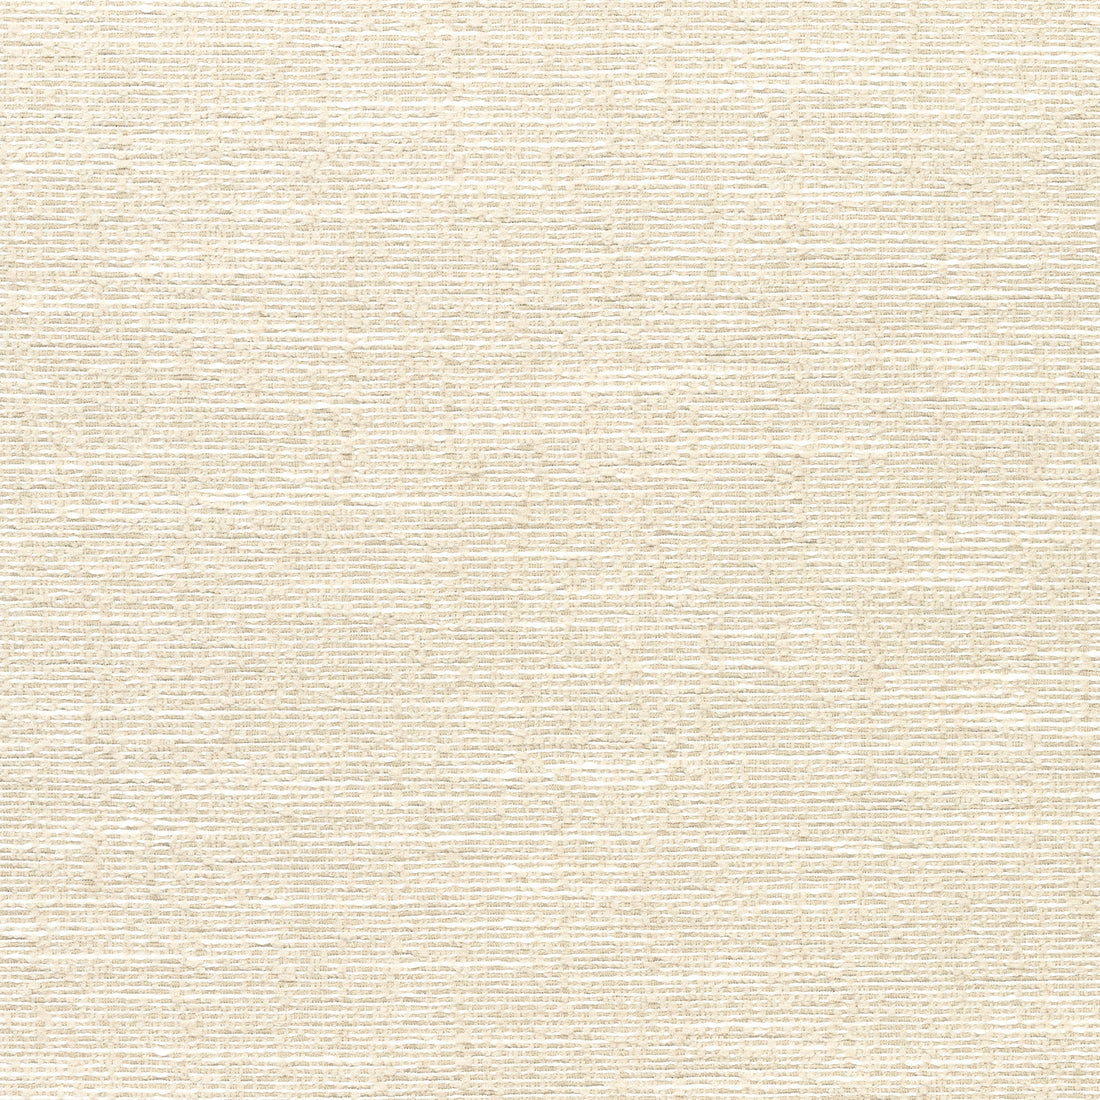 Freeport fabric in flax color - pattern number W74600 - by Thibaut in the Festival collection